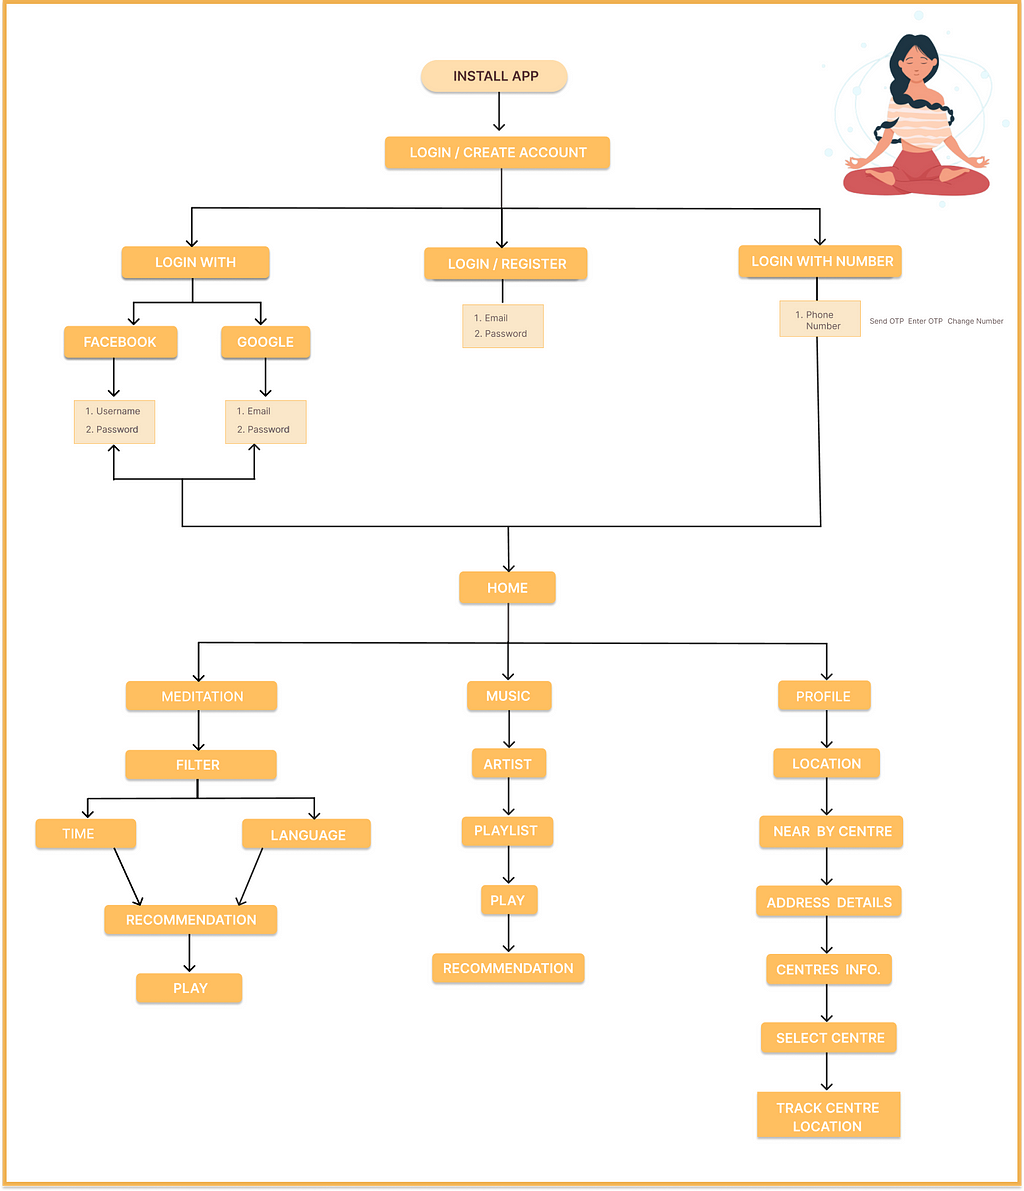 Art of living app redesigned features flowchart image.